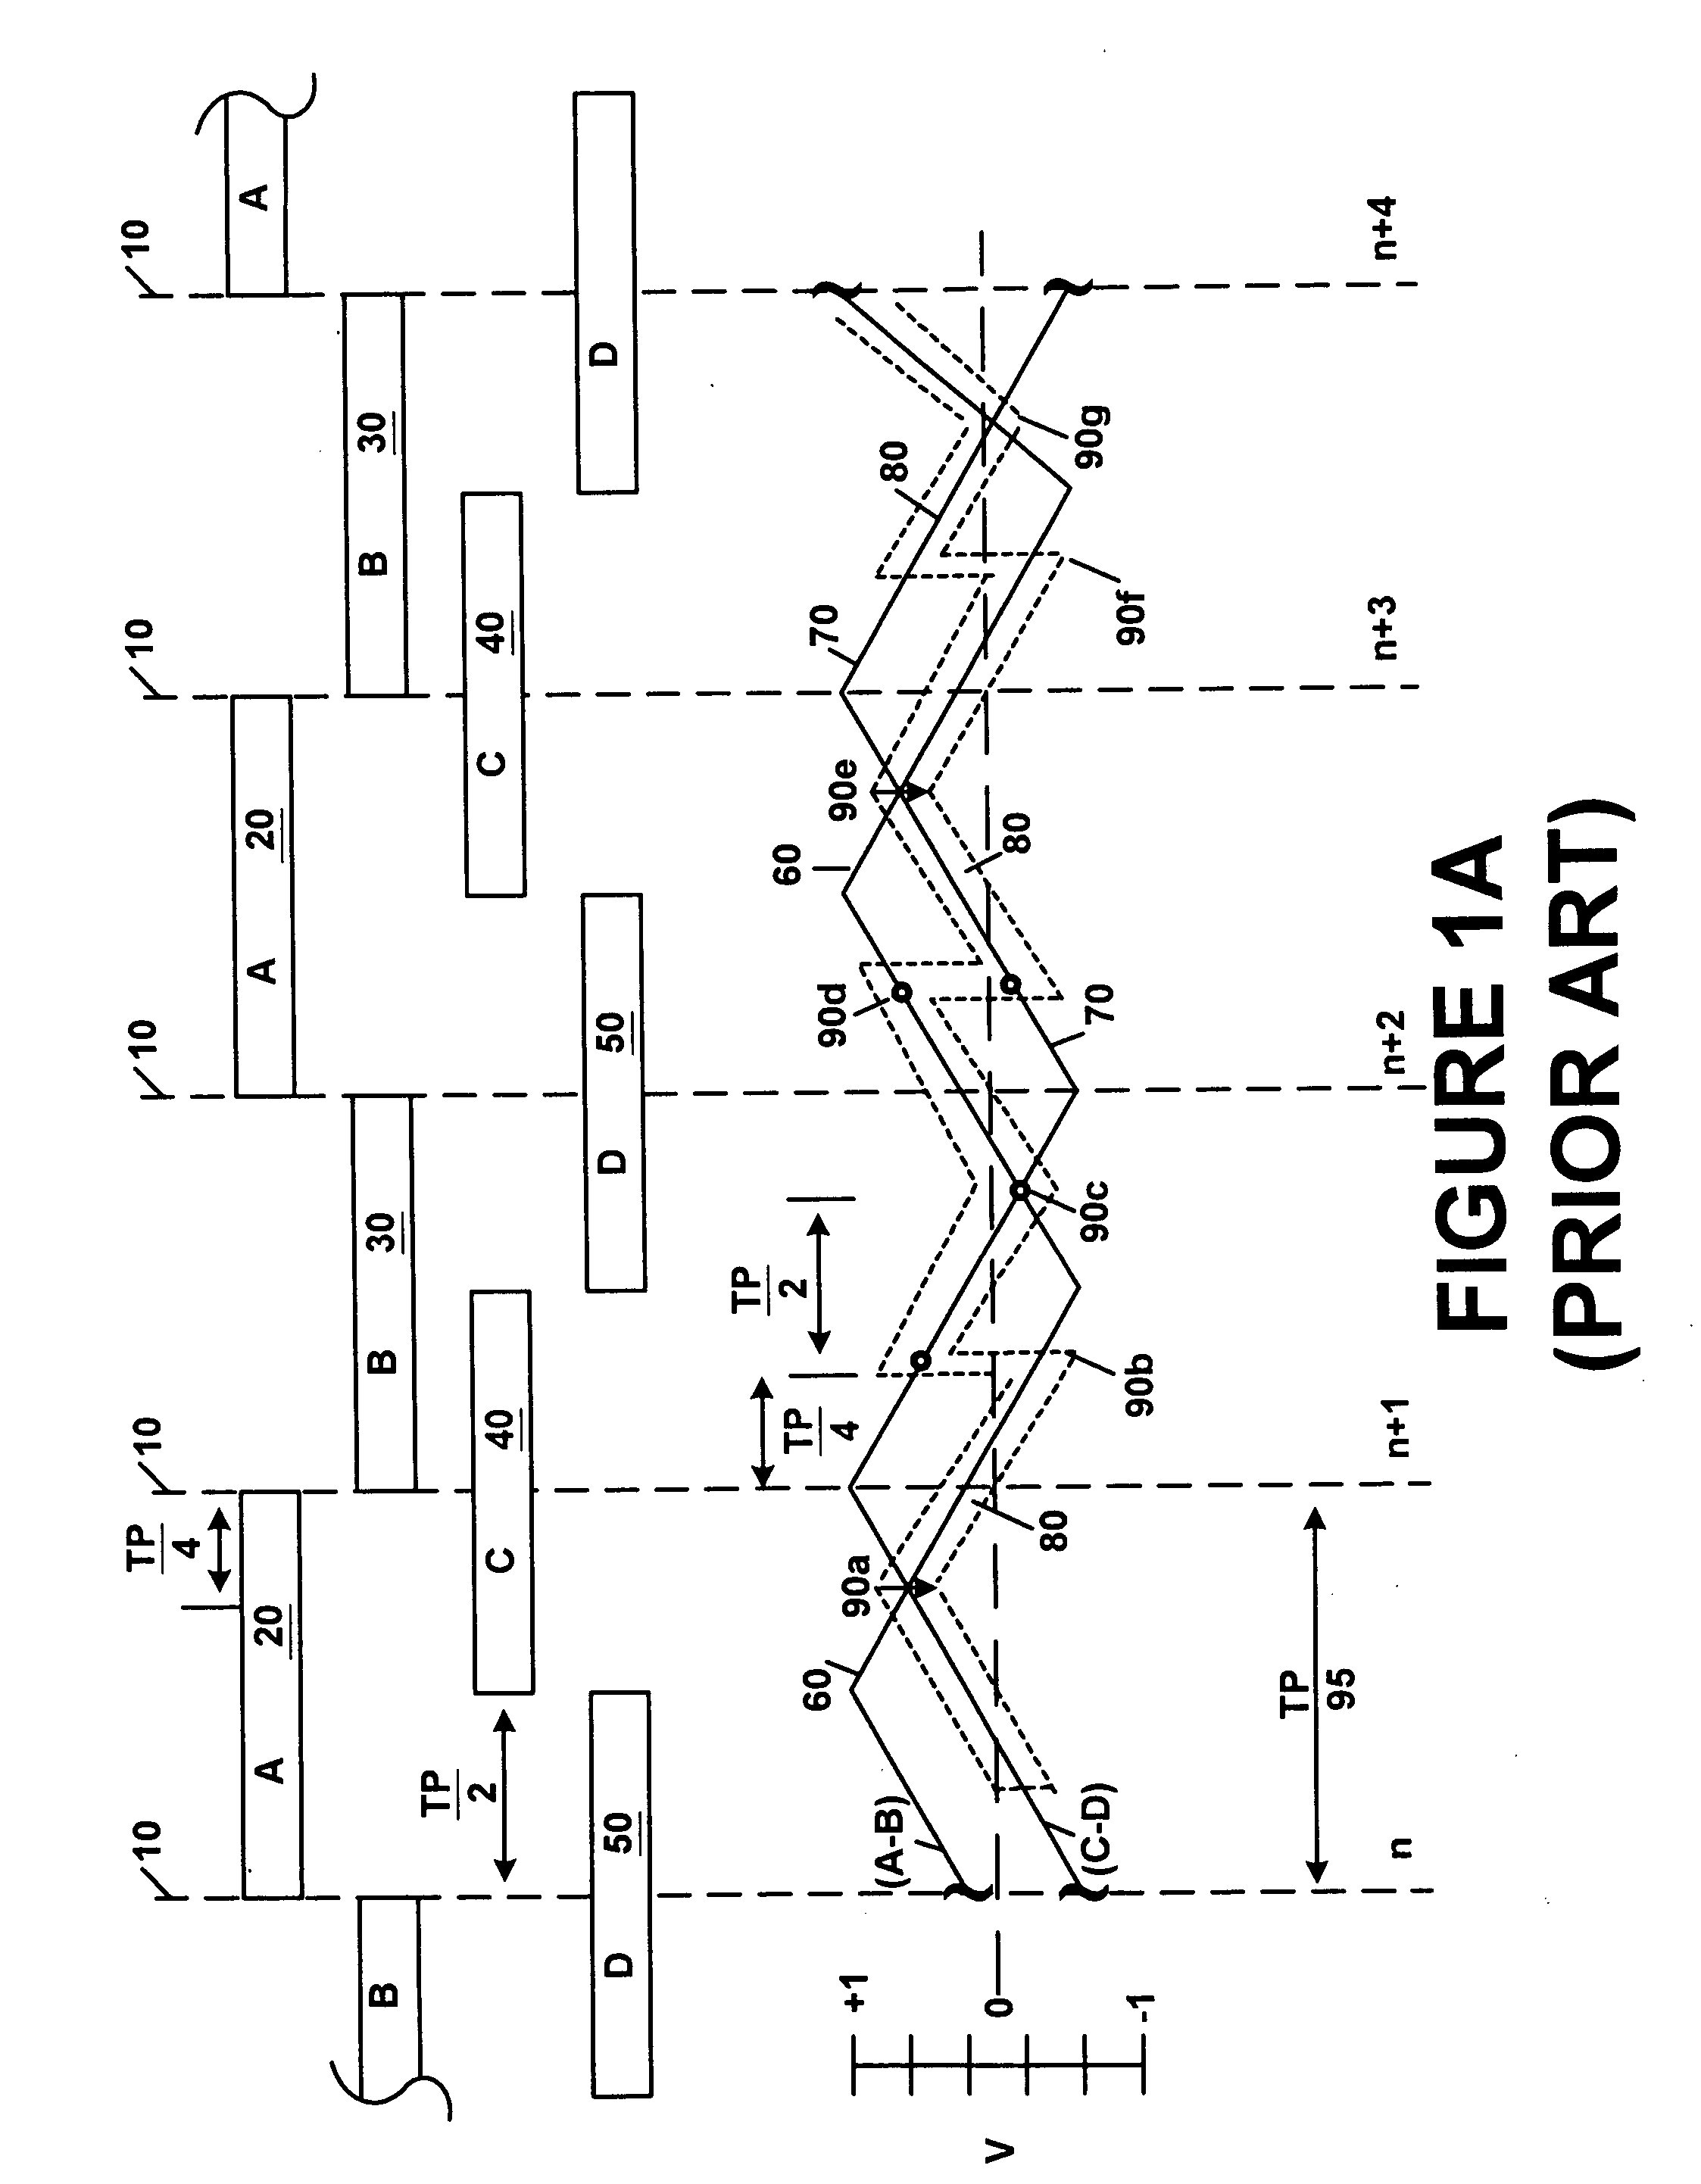 Seamless and untrimmed primary servo burst with multiple secondary servo bursts